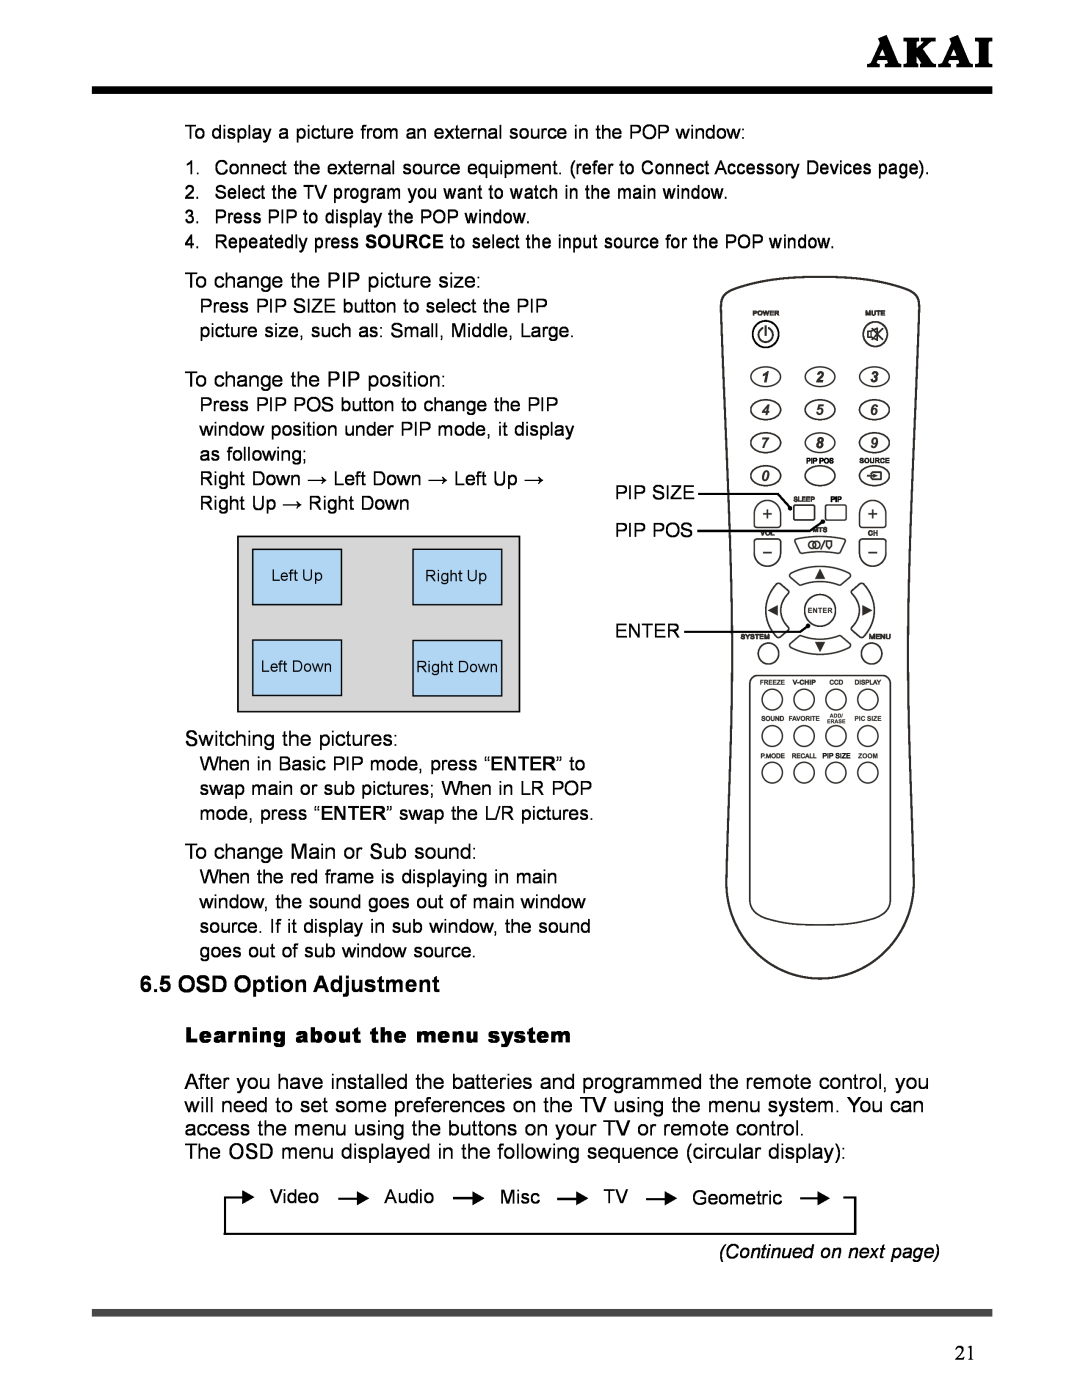 Akai LCT3226 manual OSD Option Adjustment, Learning about the menu system, Continued on next page 